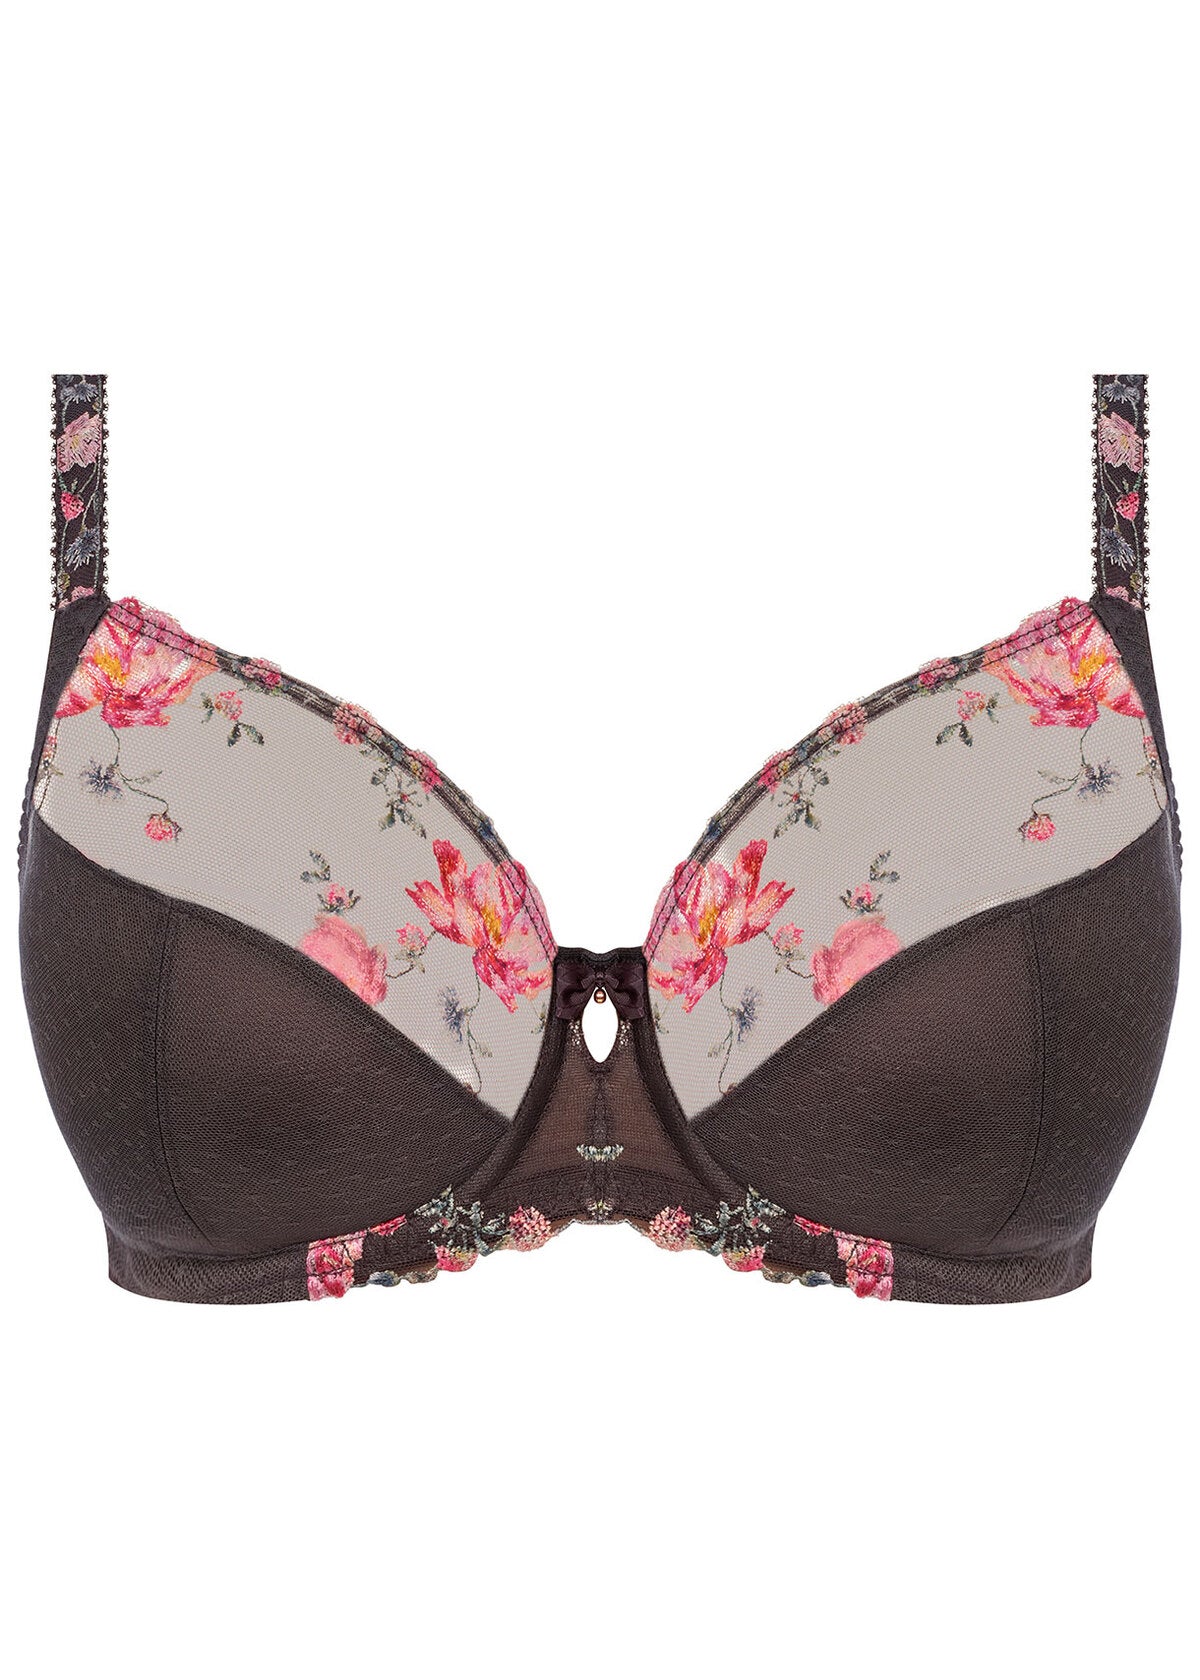 FANTASIE ADRIENNE SIDE SUPPORT FULL CUP BRA - CHARCOAL BLOOM